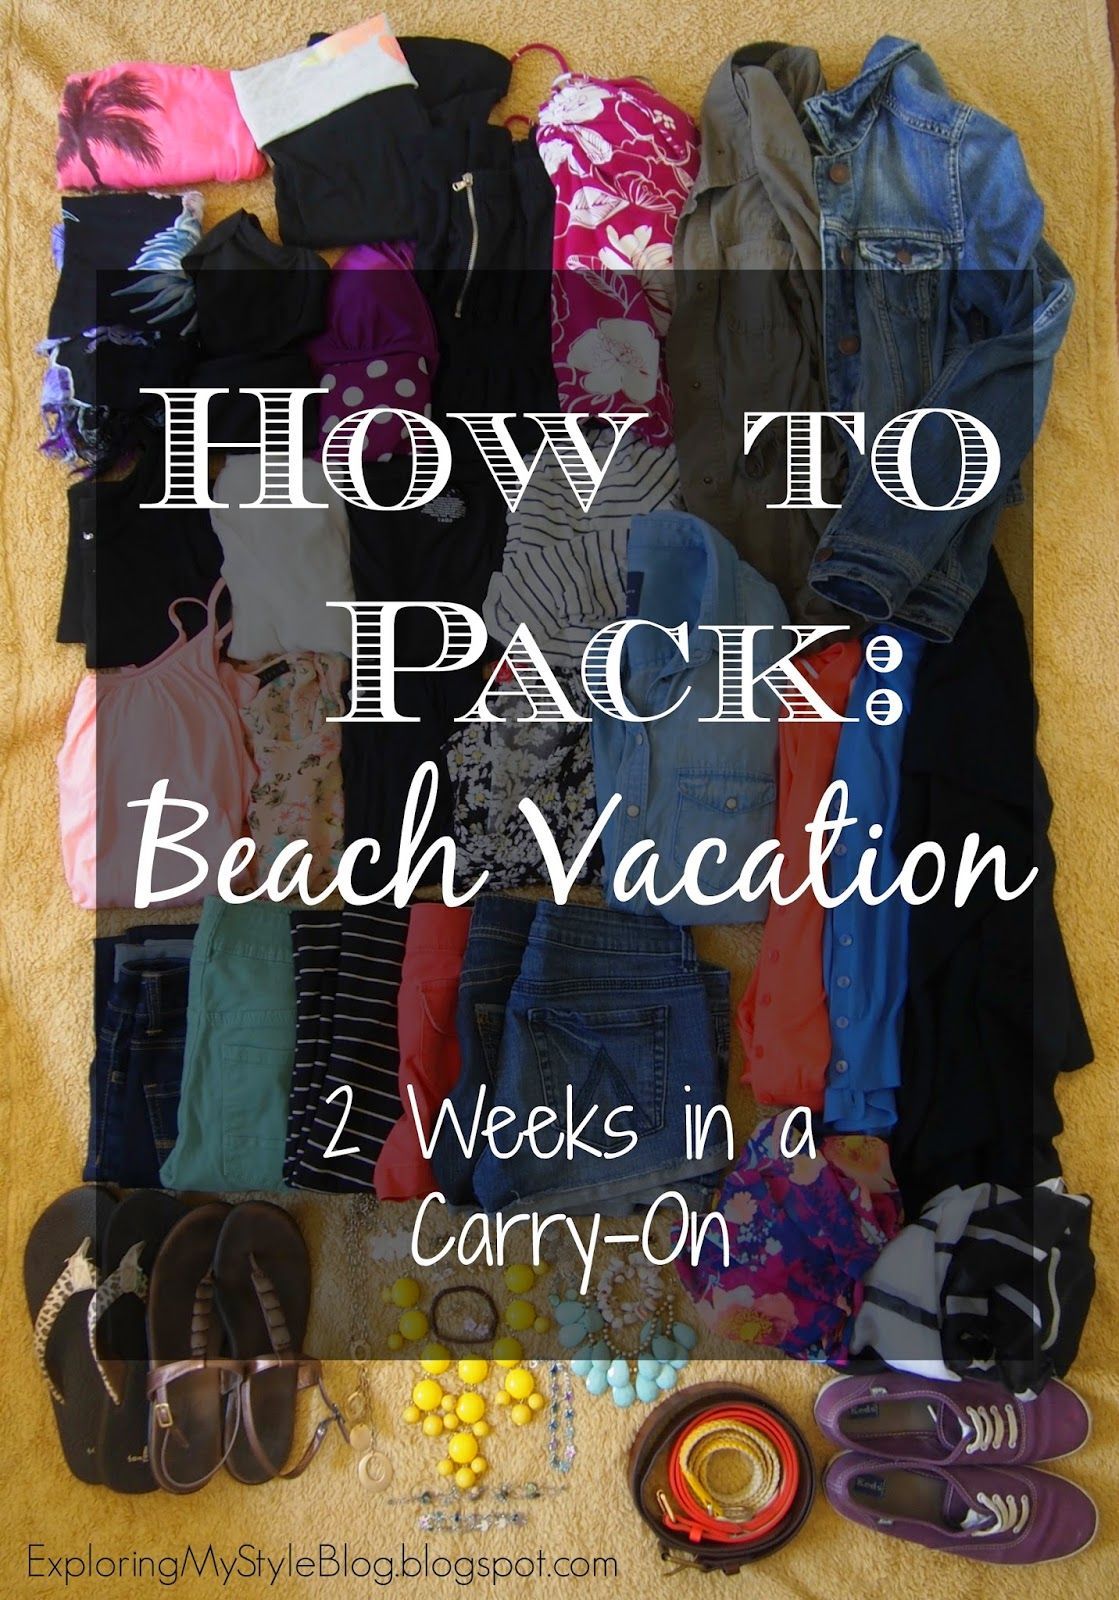 Exploring My Style: How to Pack 16 Days in a Carry